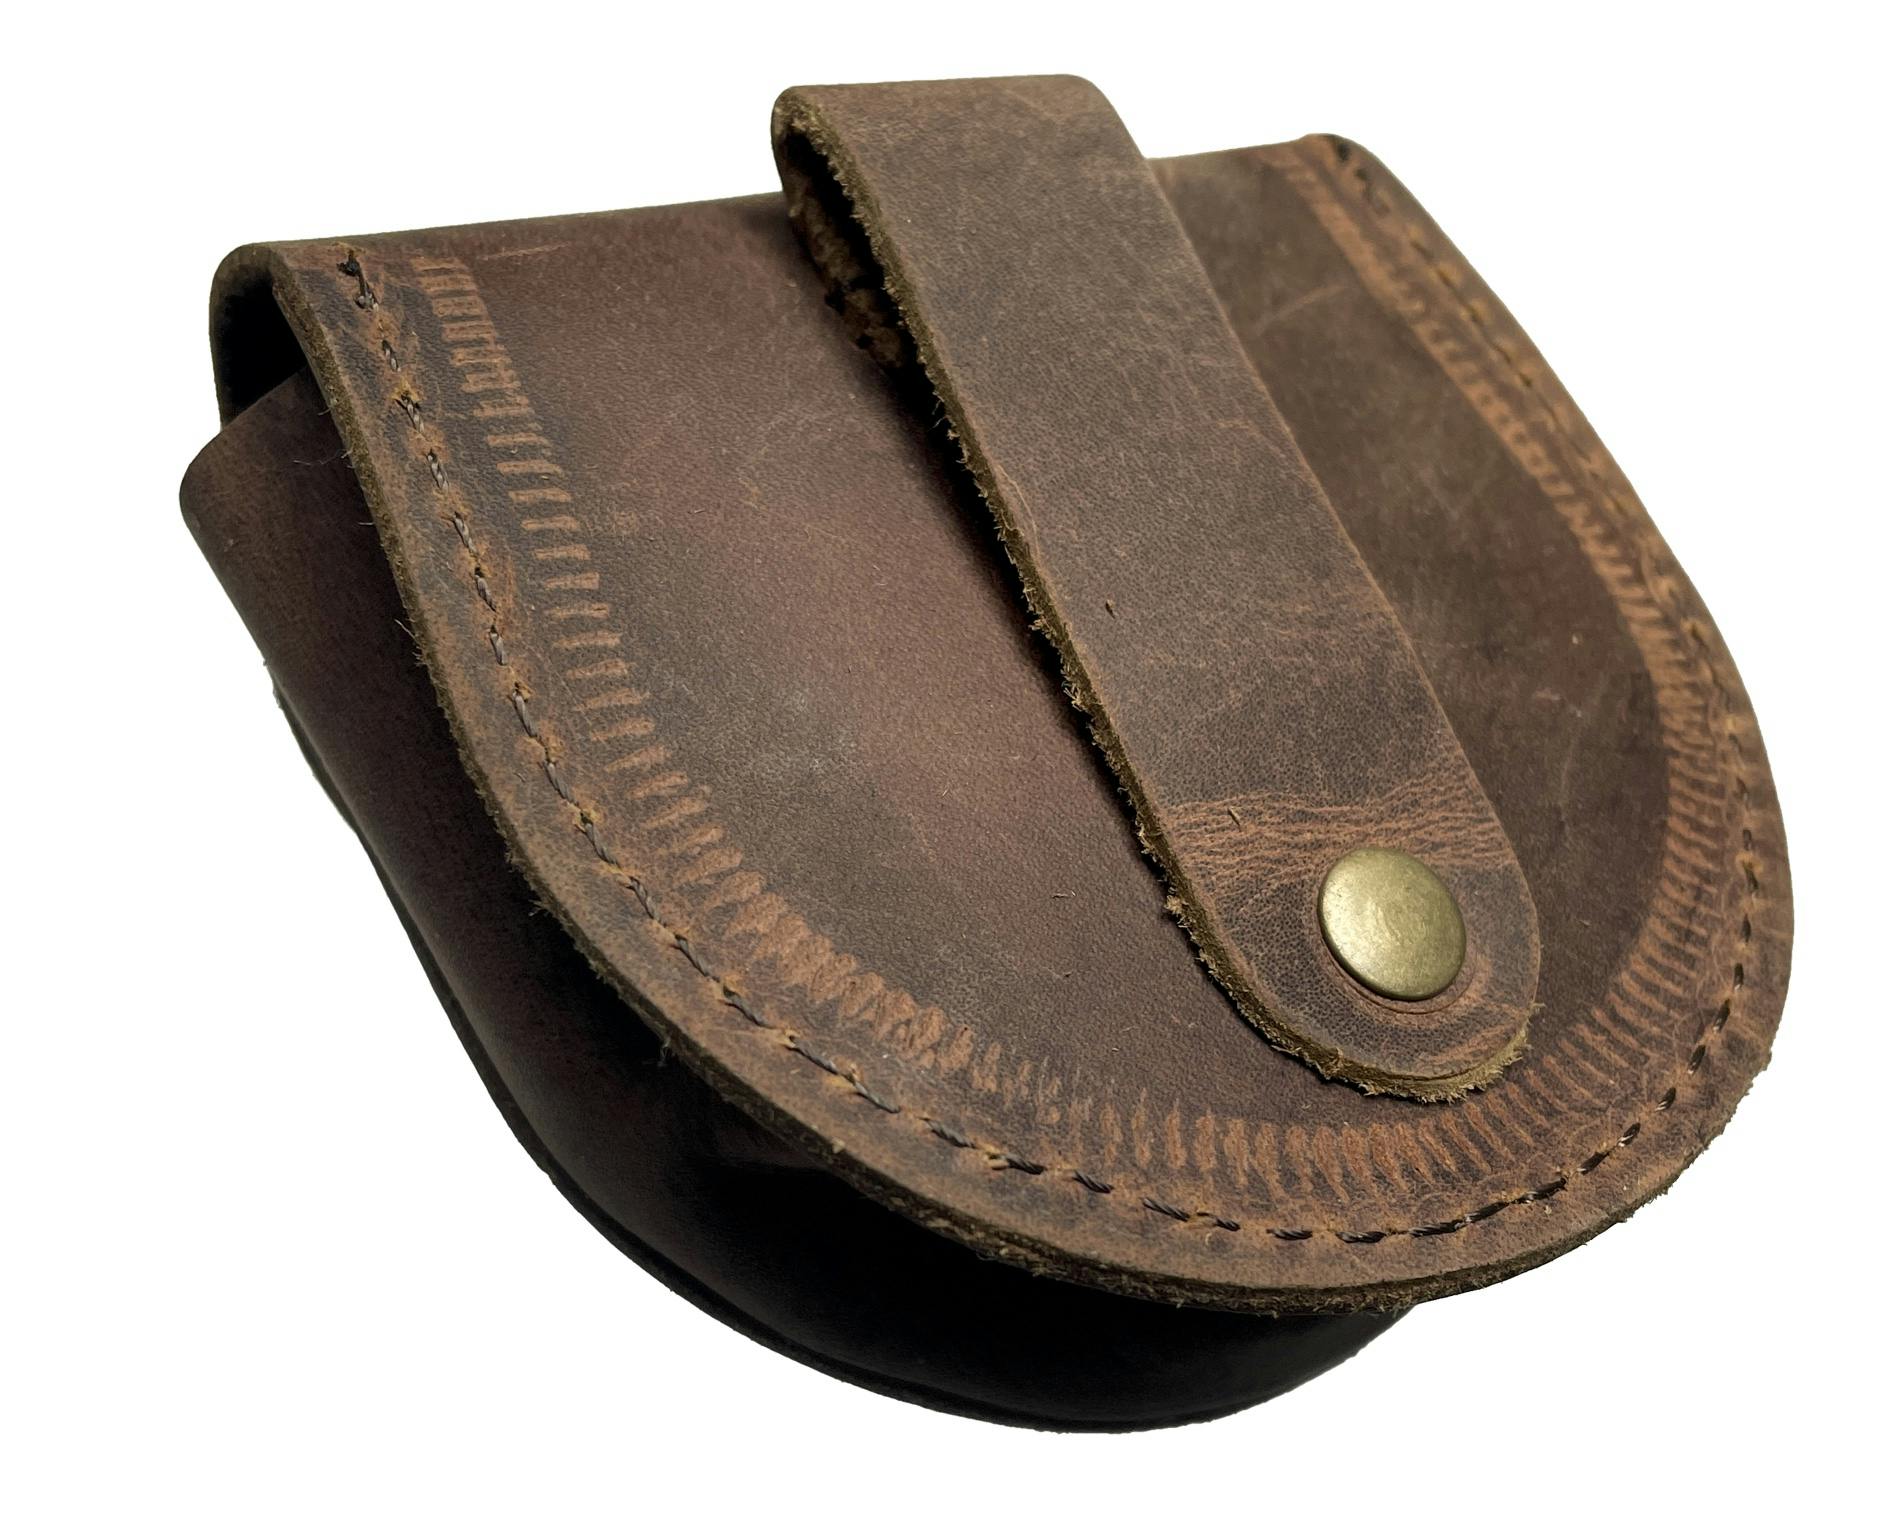 Chew pouch in leather